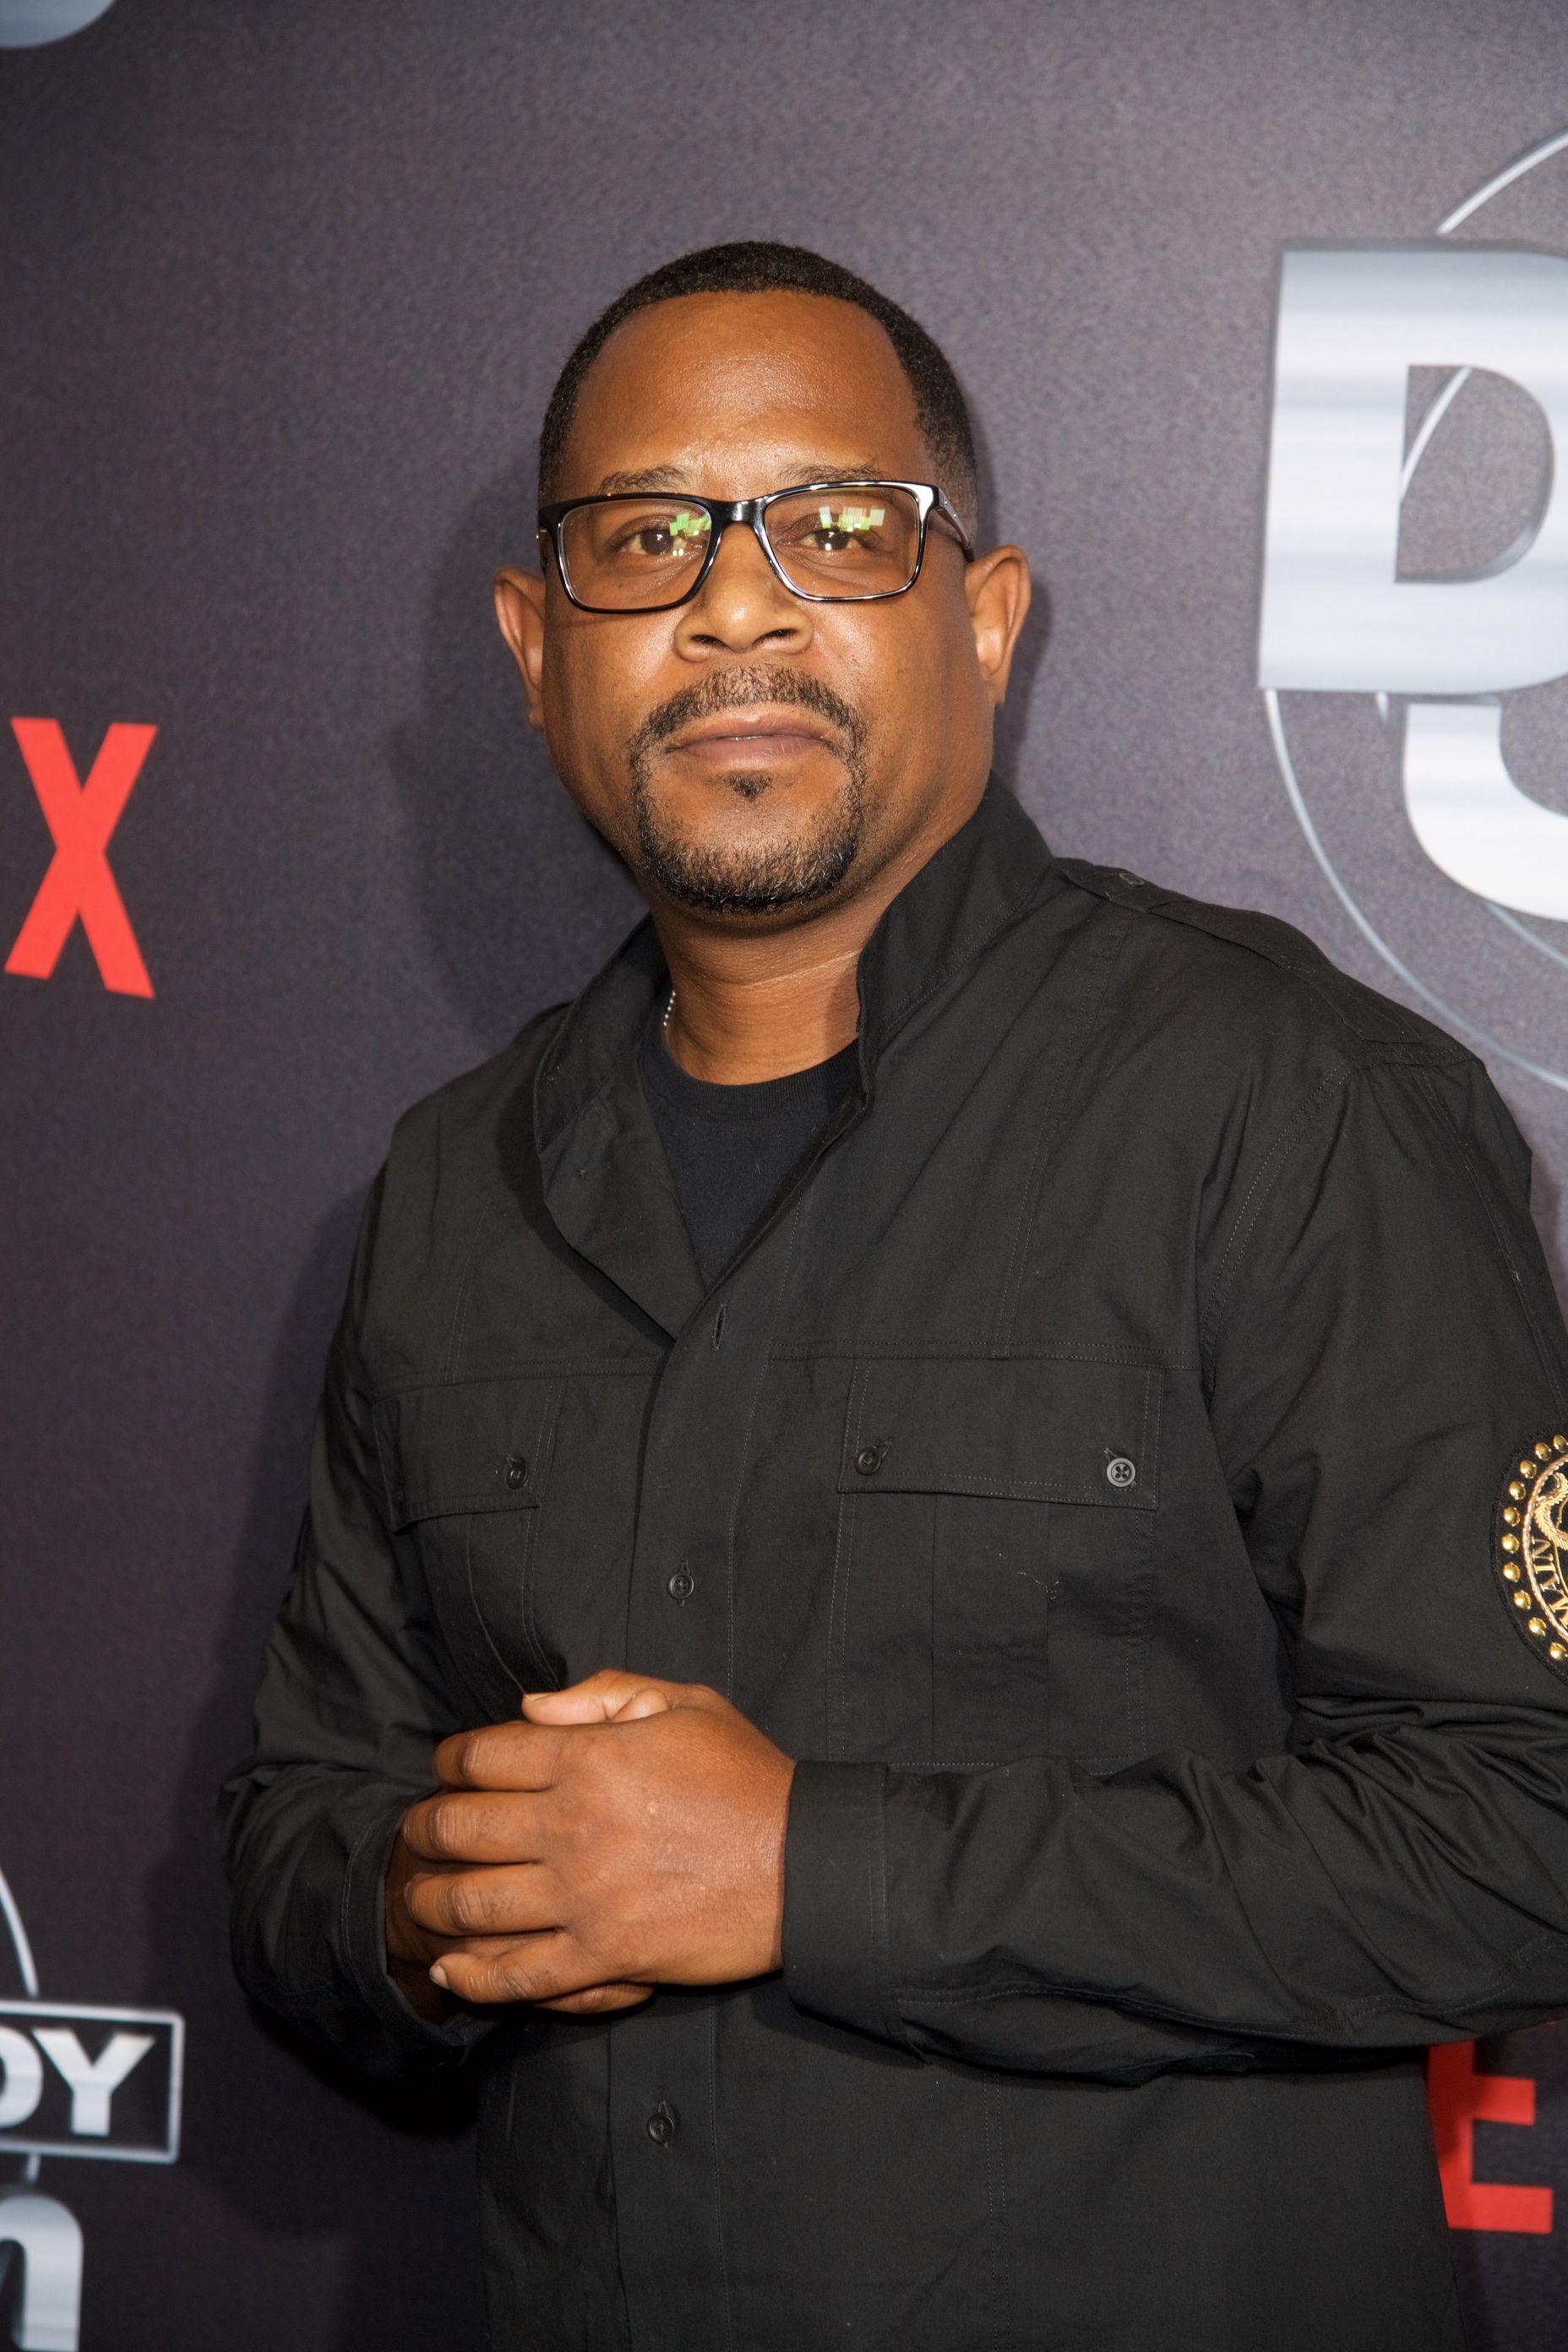 Martin Lawrence at Netflix Presents Russell Simmons "Def Comedy Jam 25" Special Event at The Beverly Hilton Hotel on September 10, 2017 in Beverly Hills, California. | Photo: Getty Images